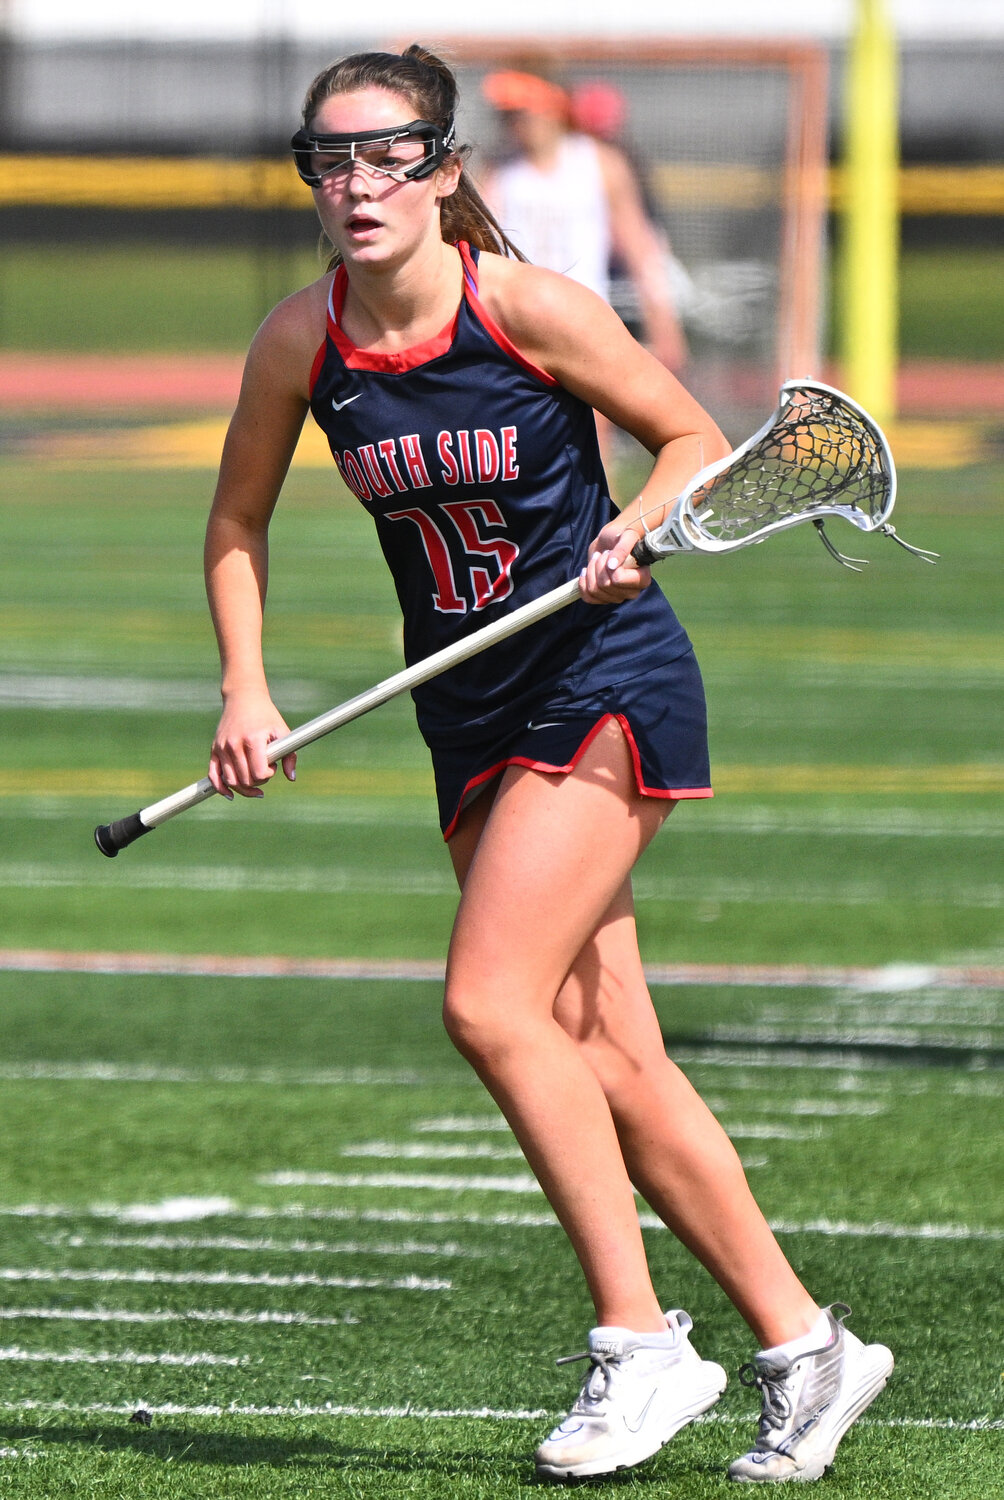 Annie Madden scored three times as the Cyclones opened the Nassau Class C playoffs with a 19-4 victory over Hewlett May 18.